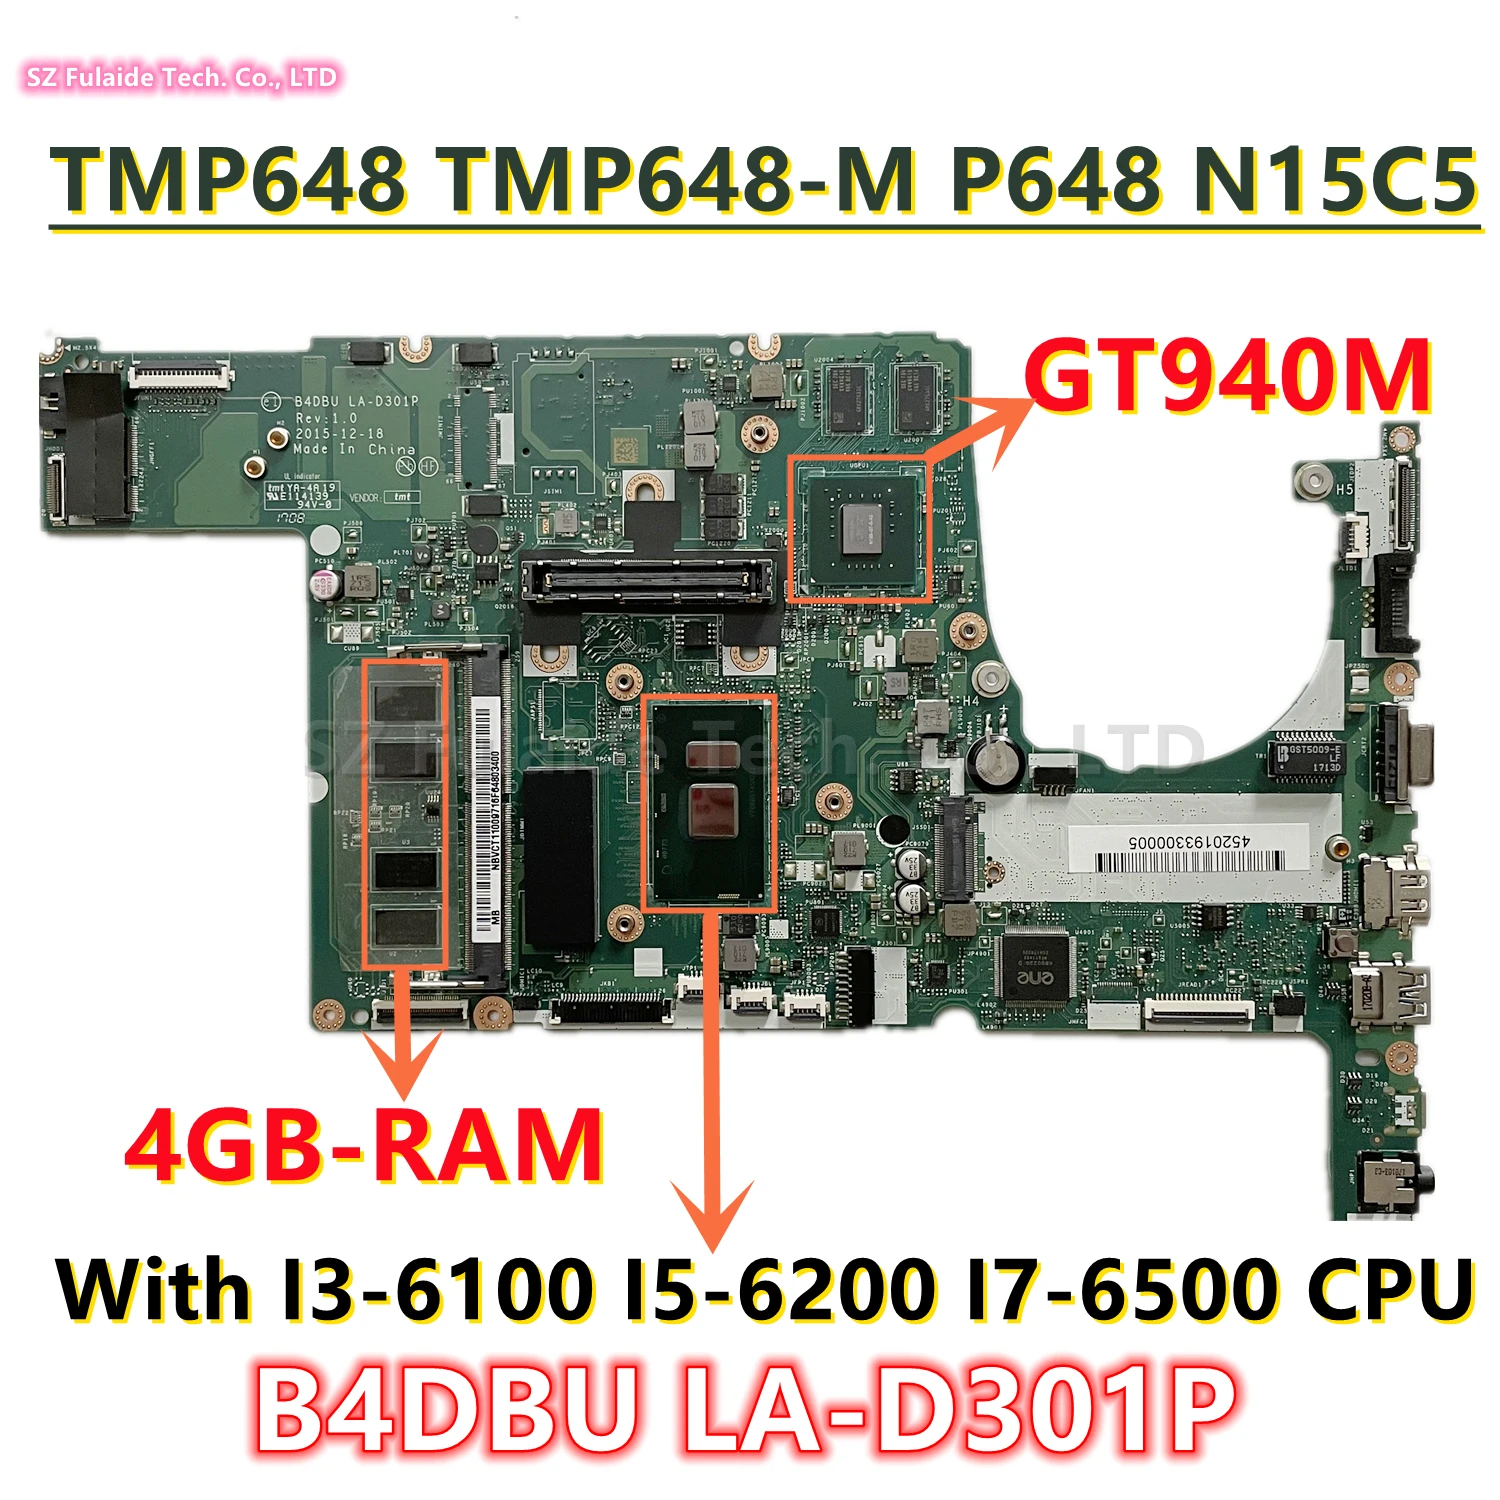 

LA-D301P For Acer Travelmate TMP648 TMP648-M P648 N15C5 Laptop Motherboard With I3-6100 I5-6200 I7-6500 CPU GT940M GPU 4GB-RAM